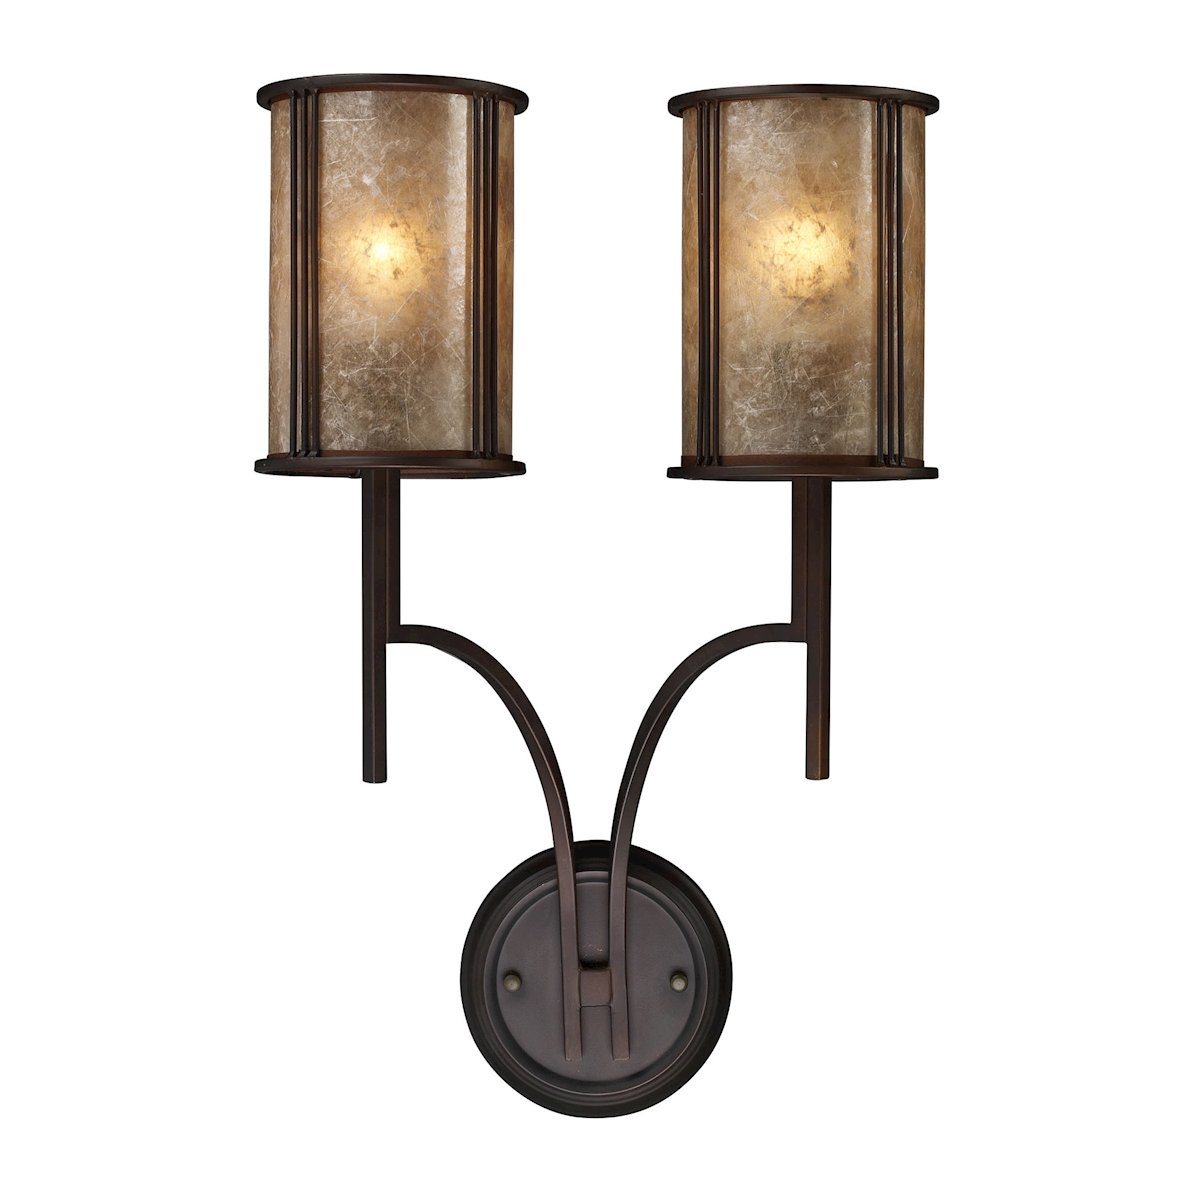 Barringer 2 Light Wall Sconce In Aged Bronze And Tan Mica Wall Sconce Elk Lighting 